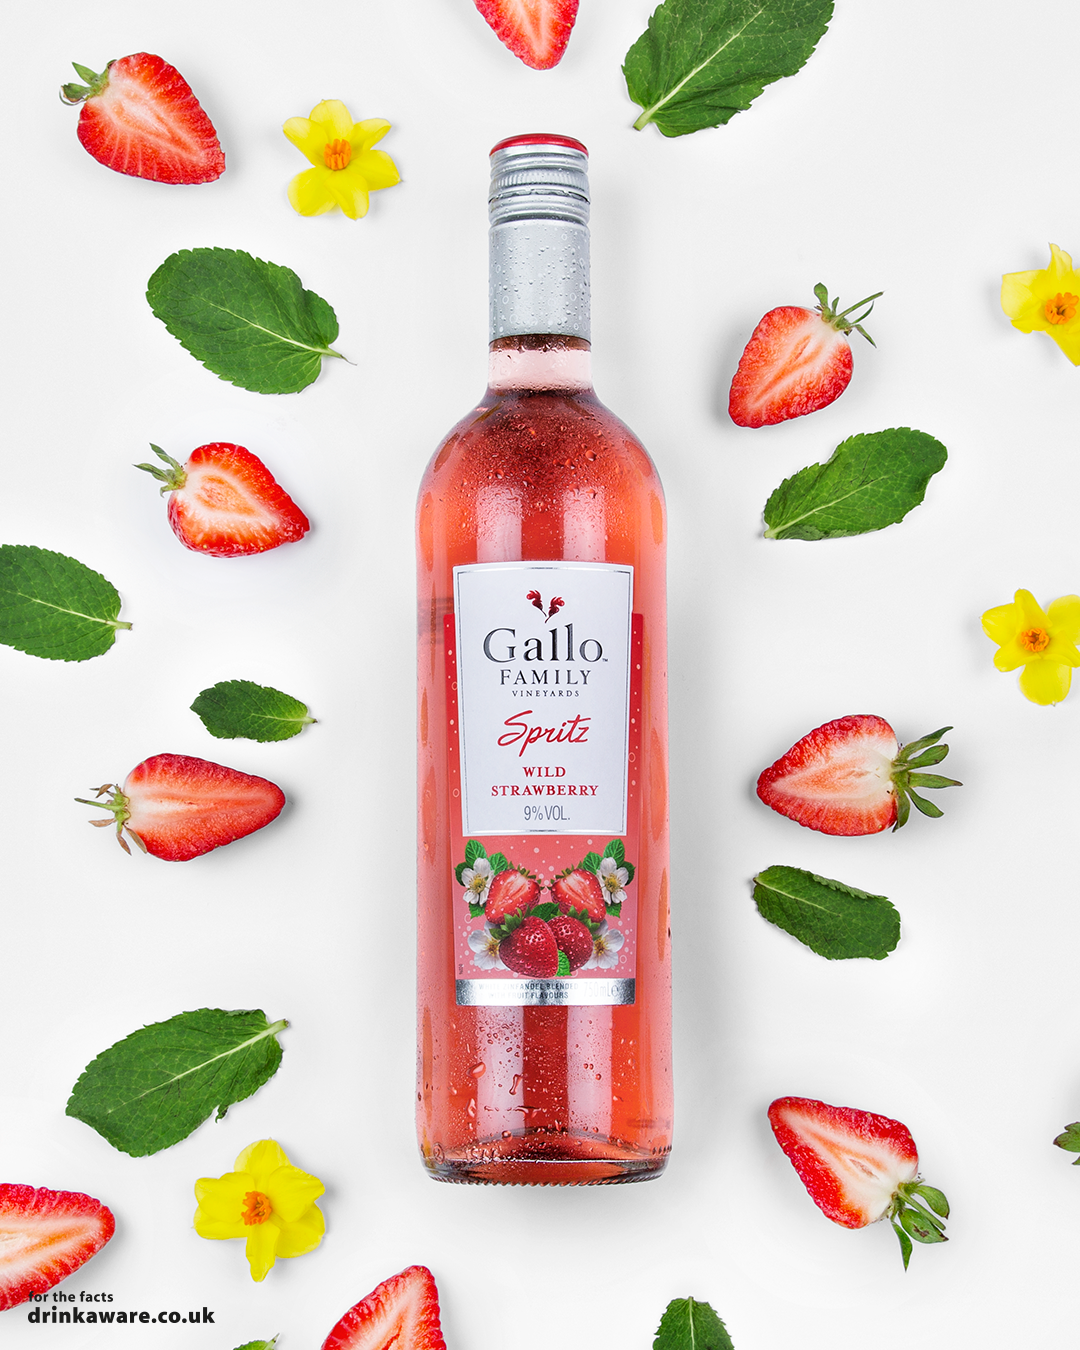 935-Gallo-Spritz-2018-Flat-Lays-WS-Bottle.png